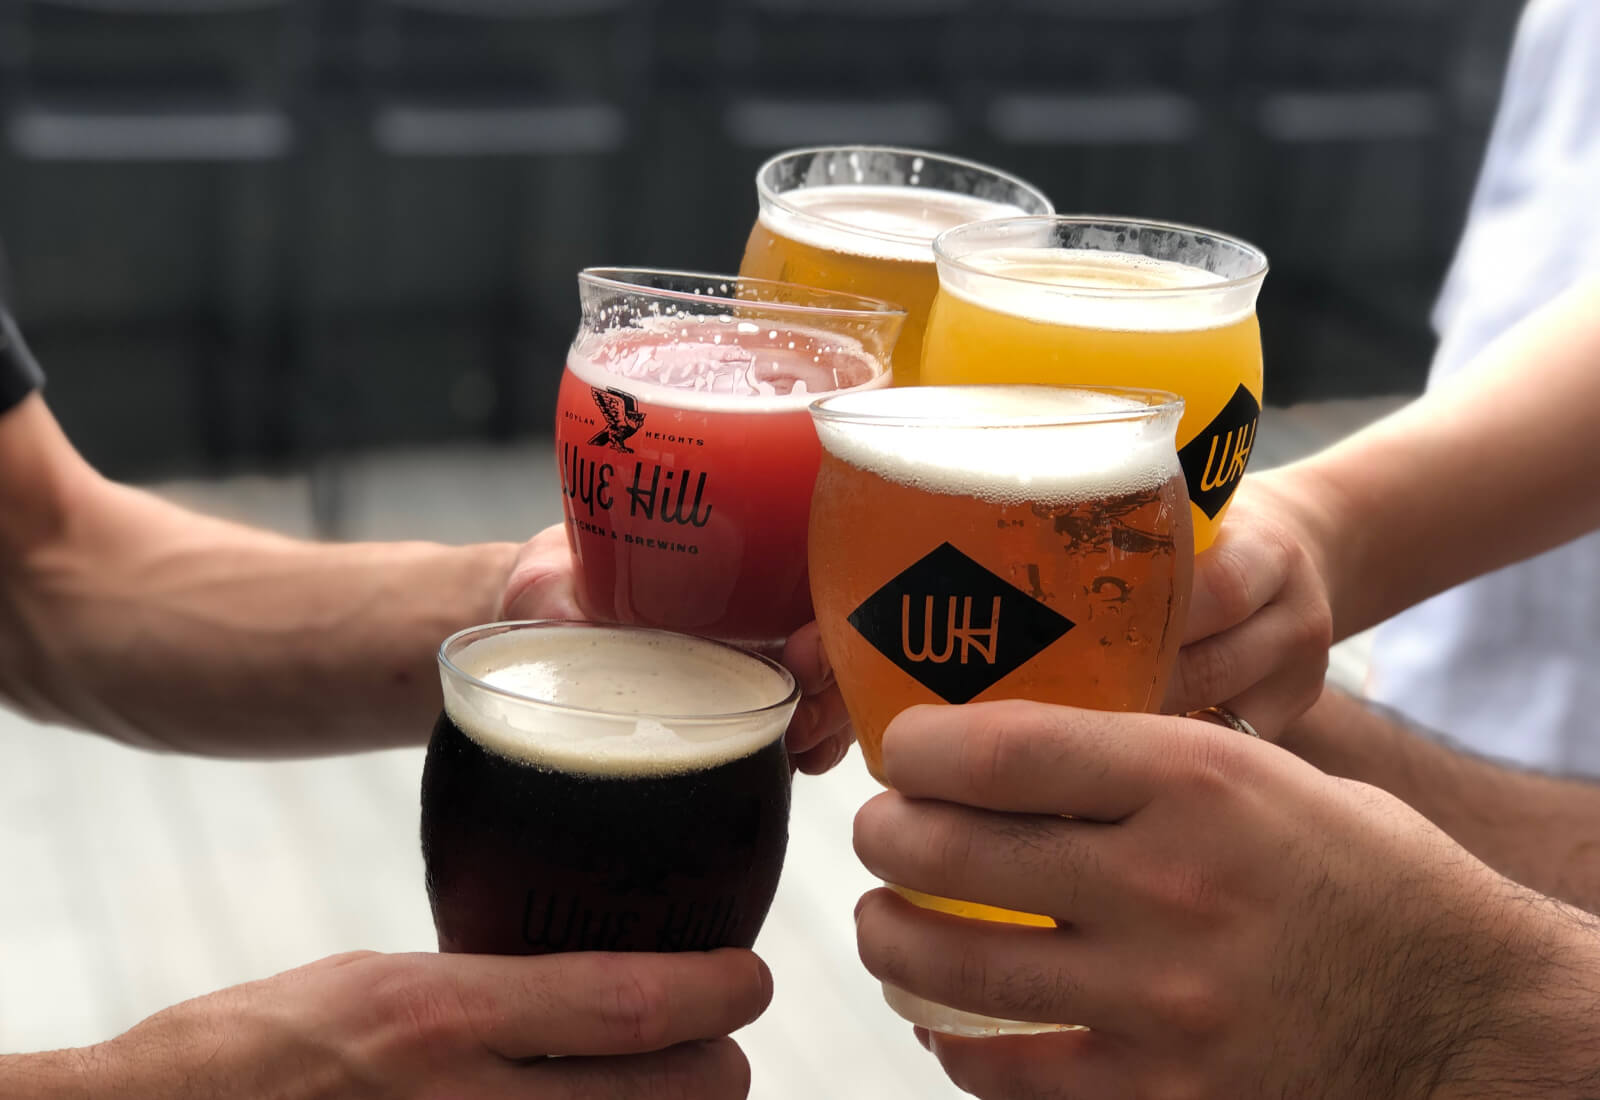 Branded Pint Glasses | Brand Identity for Wye Hill Kitchen and Brewing in Raleigh, NC